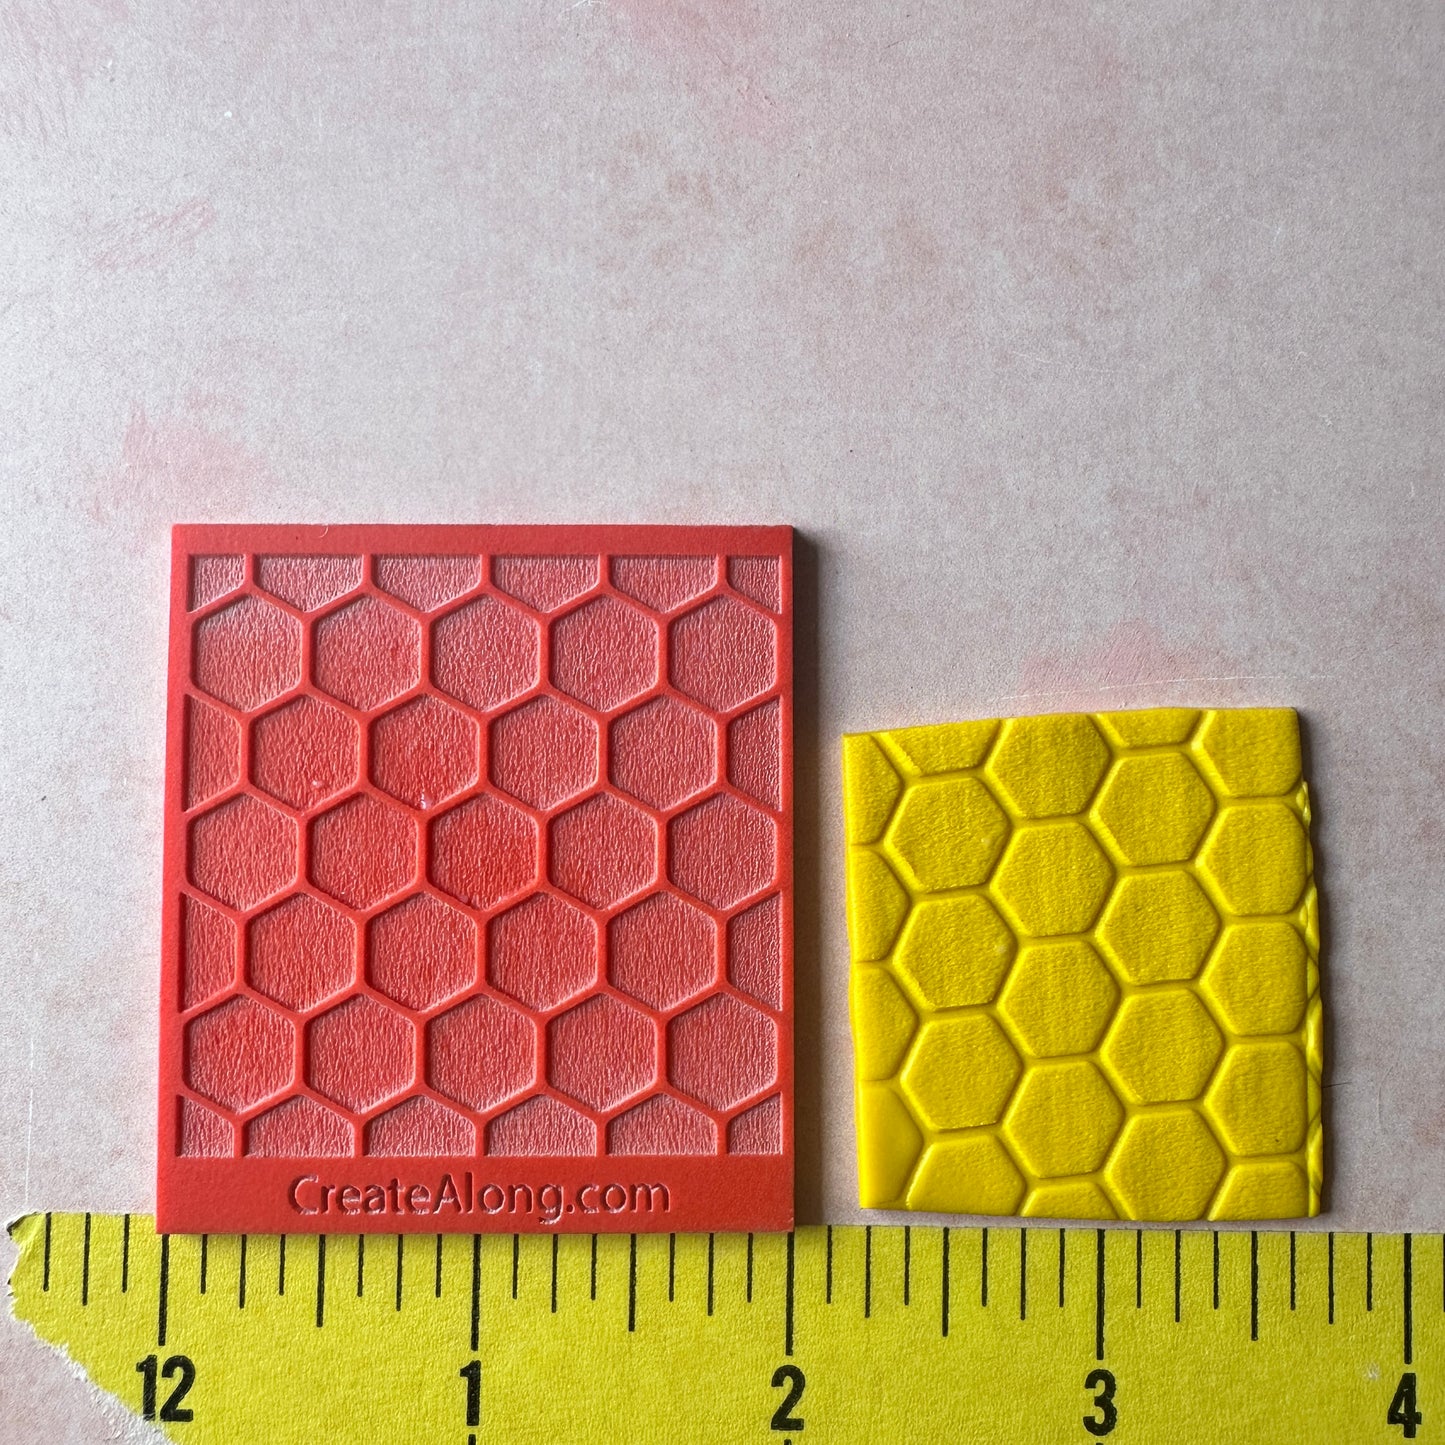 Honey Comb Innie rubber stamp deco element small stamps for polymer clay and crafts